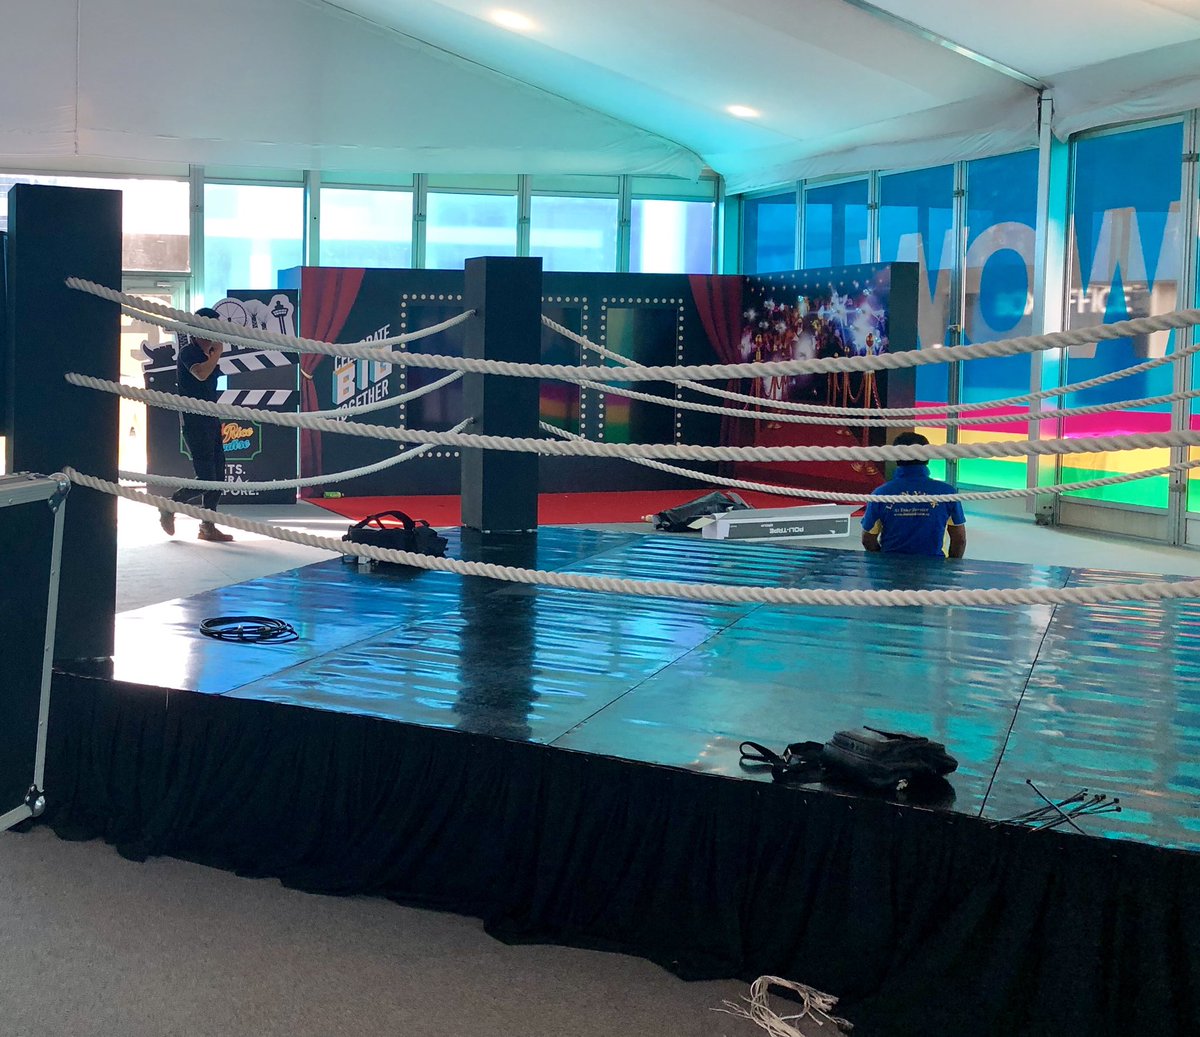 Preparations are on for Mediacorp Festival later today. One of the largest events for Singapore Marketers. Just regular conference stuff like a Muay Thai boxing ring! See you soon! #MediacorpFest